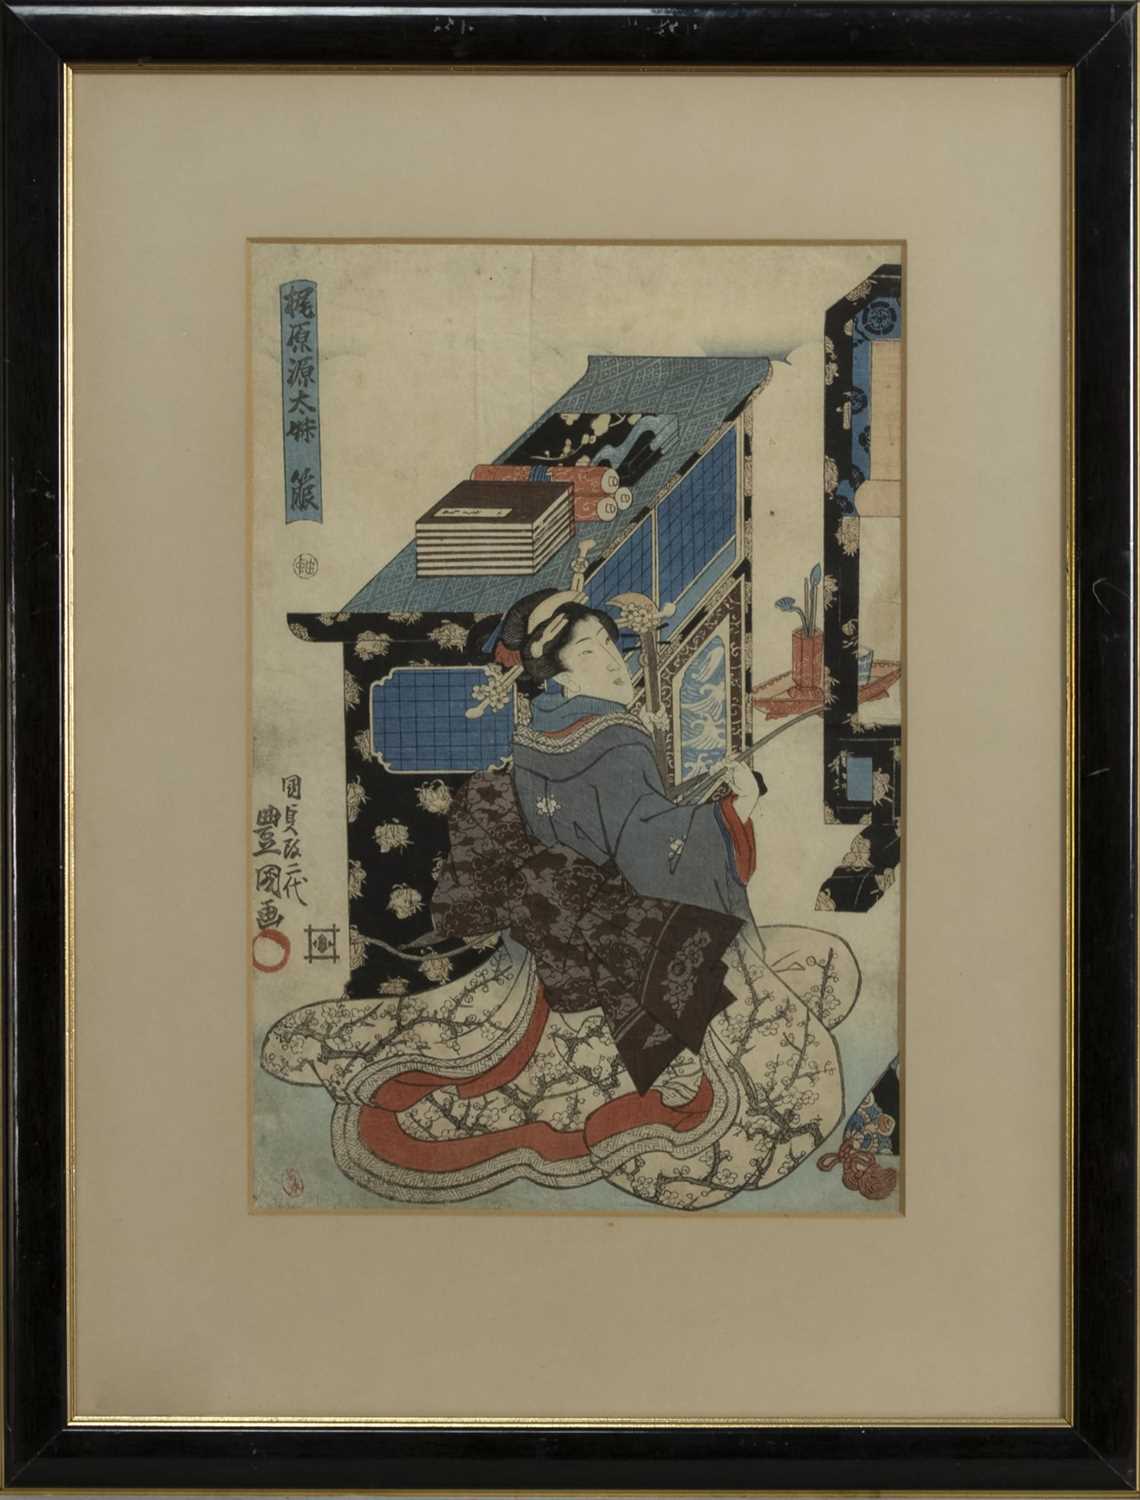 Lot 1666 - A LATE 19TH/EARLY 20TH CENTURY JAPANESE WOODBLOCK PRINT